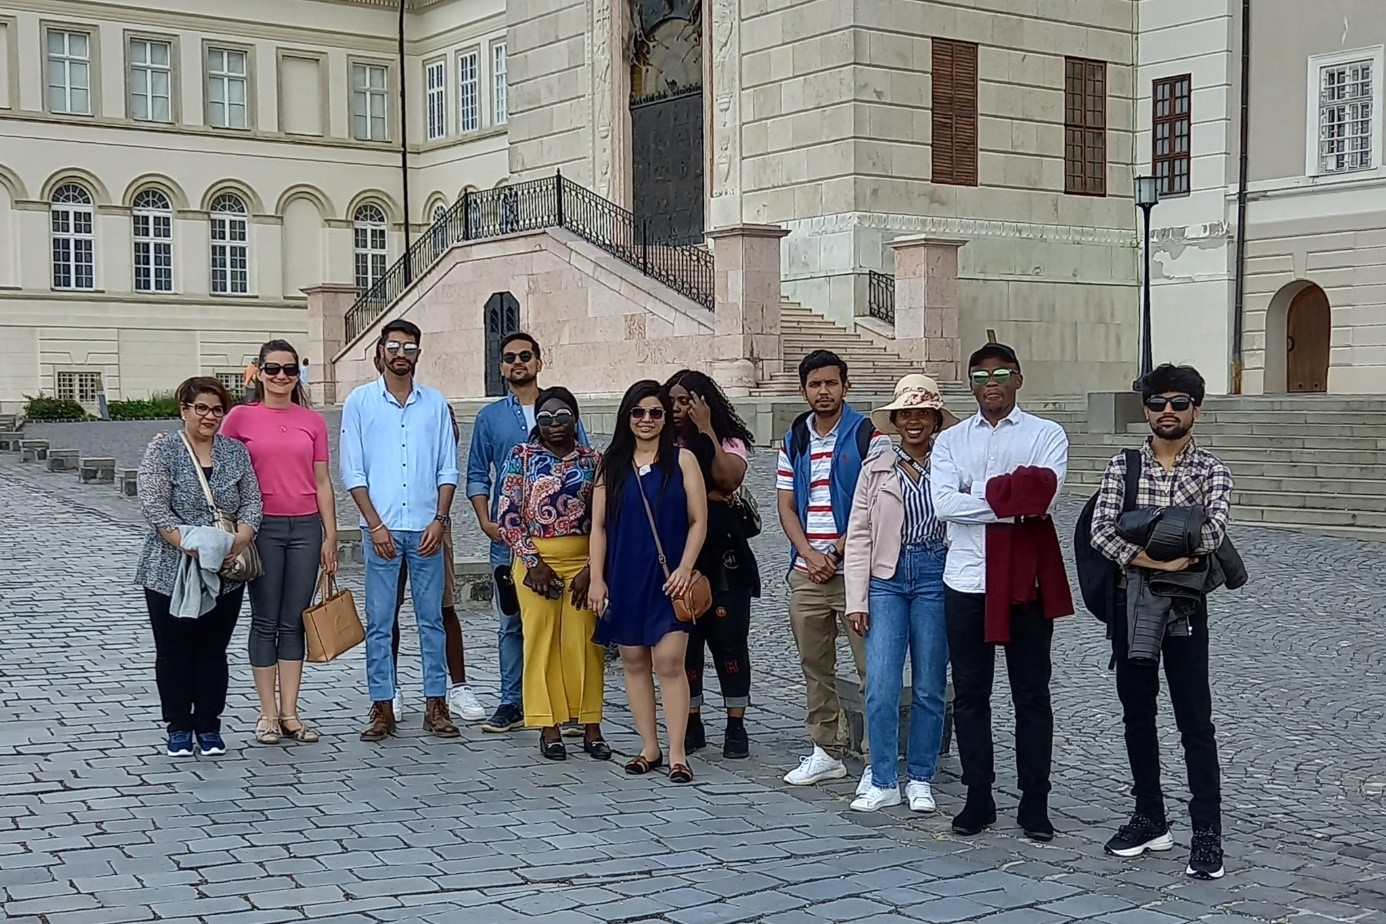 The international Christian scholarship students studying in Győr were also able to visit the 800-year-old basilica of the Pannonhalma Abbey.